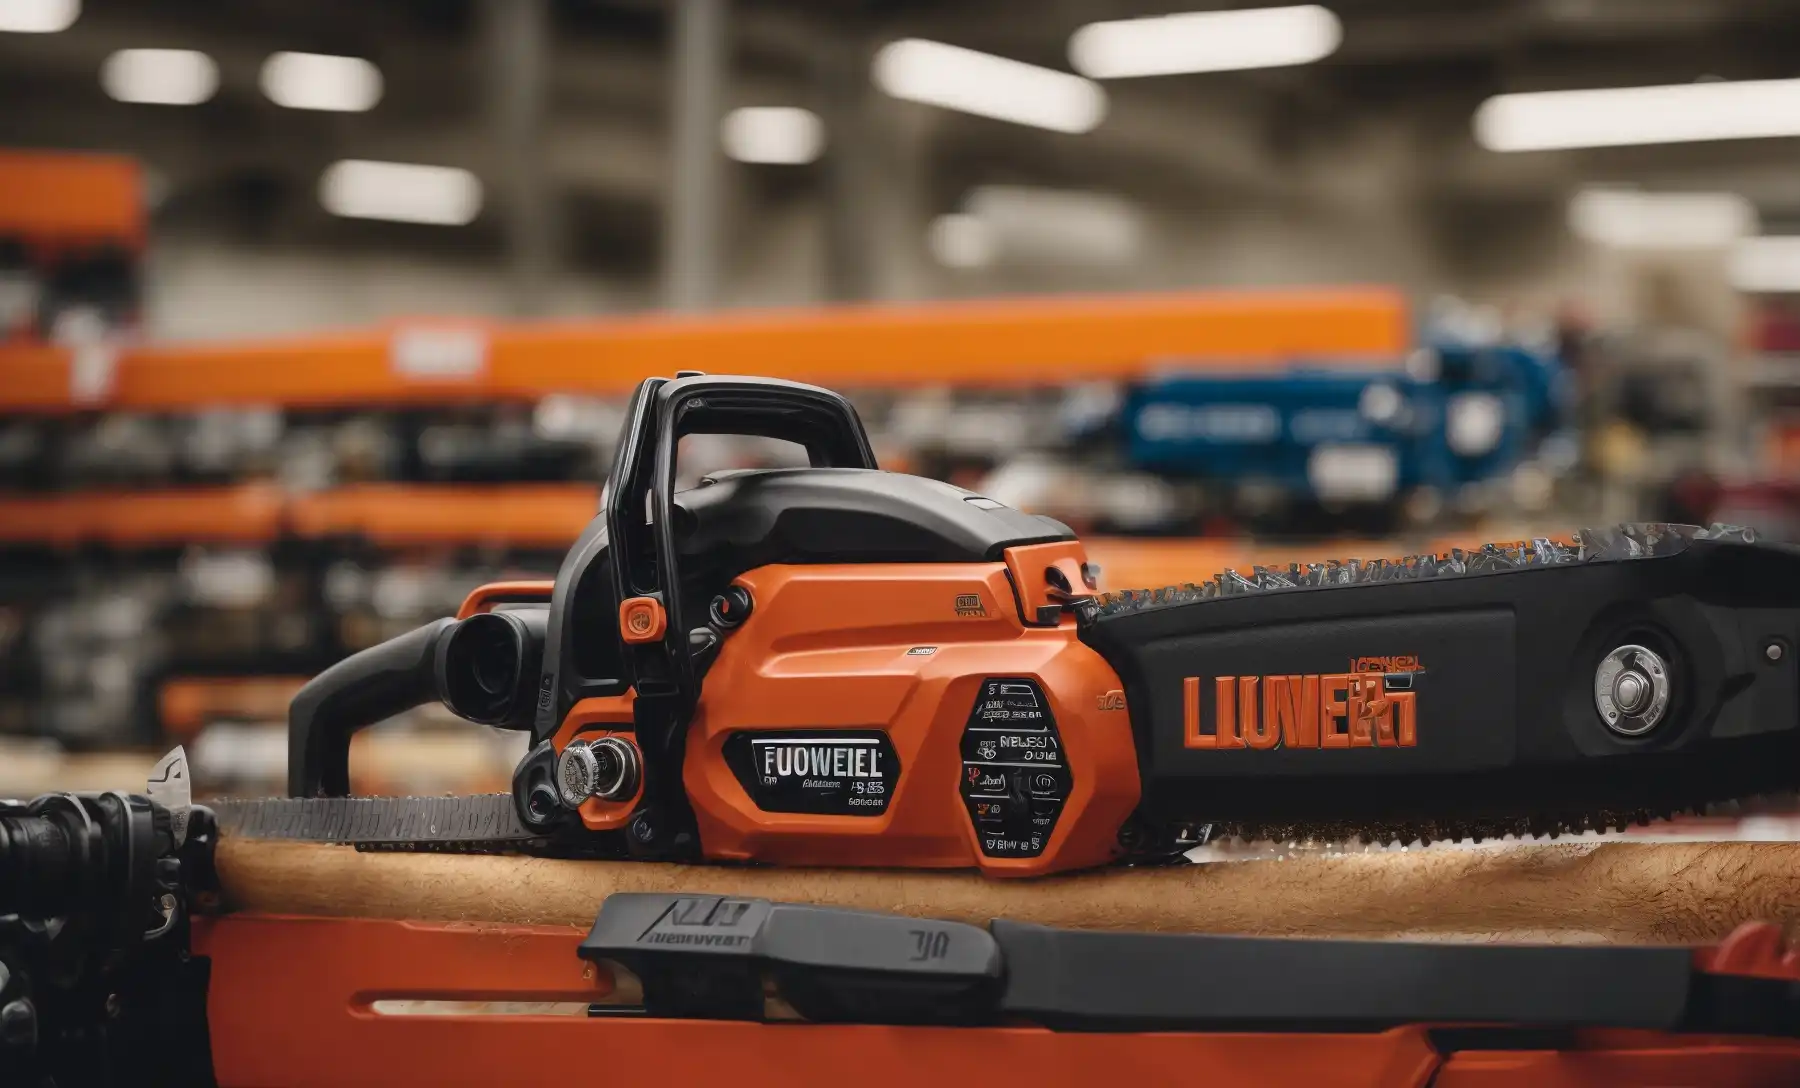 How Much to Rent a Chainsaw from Lowes